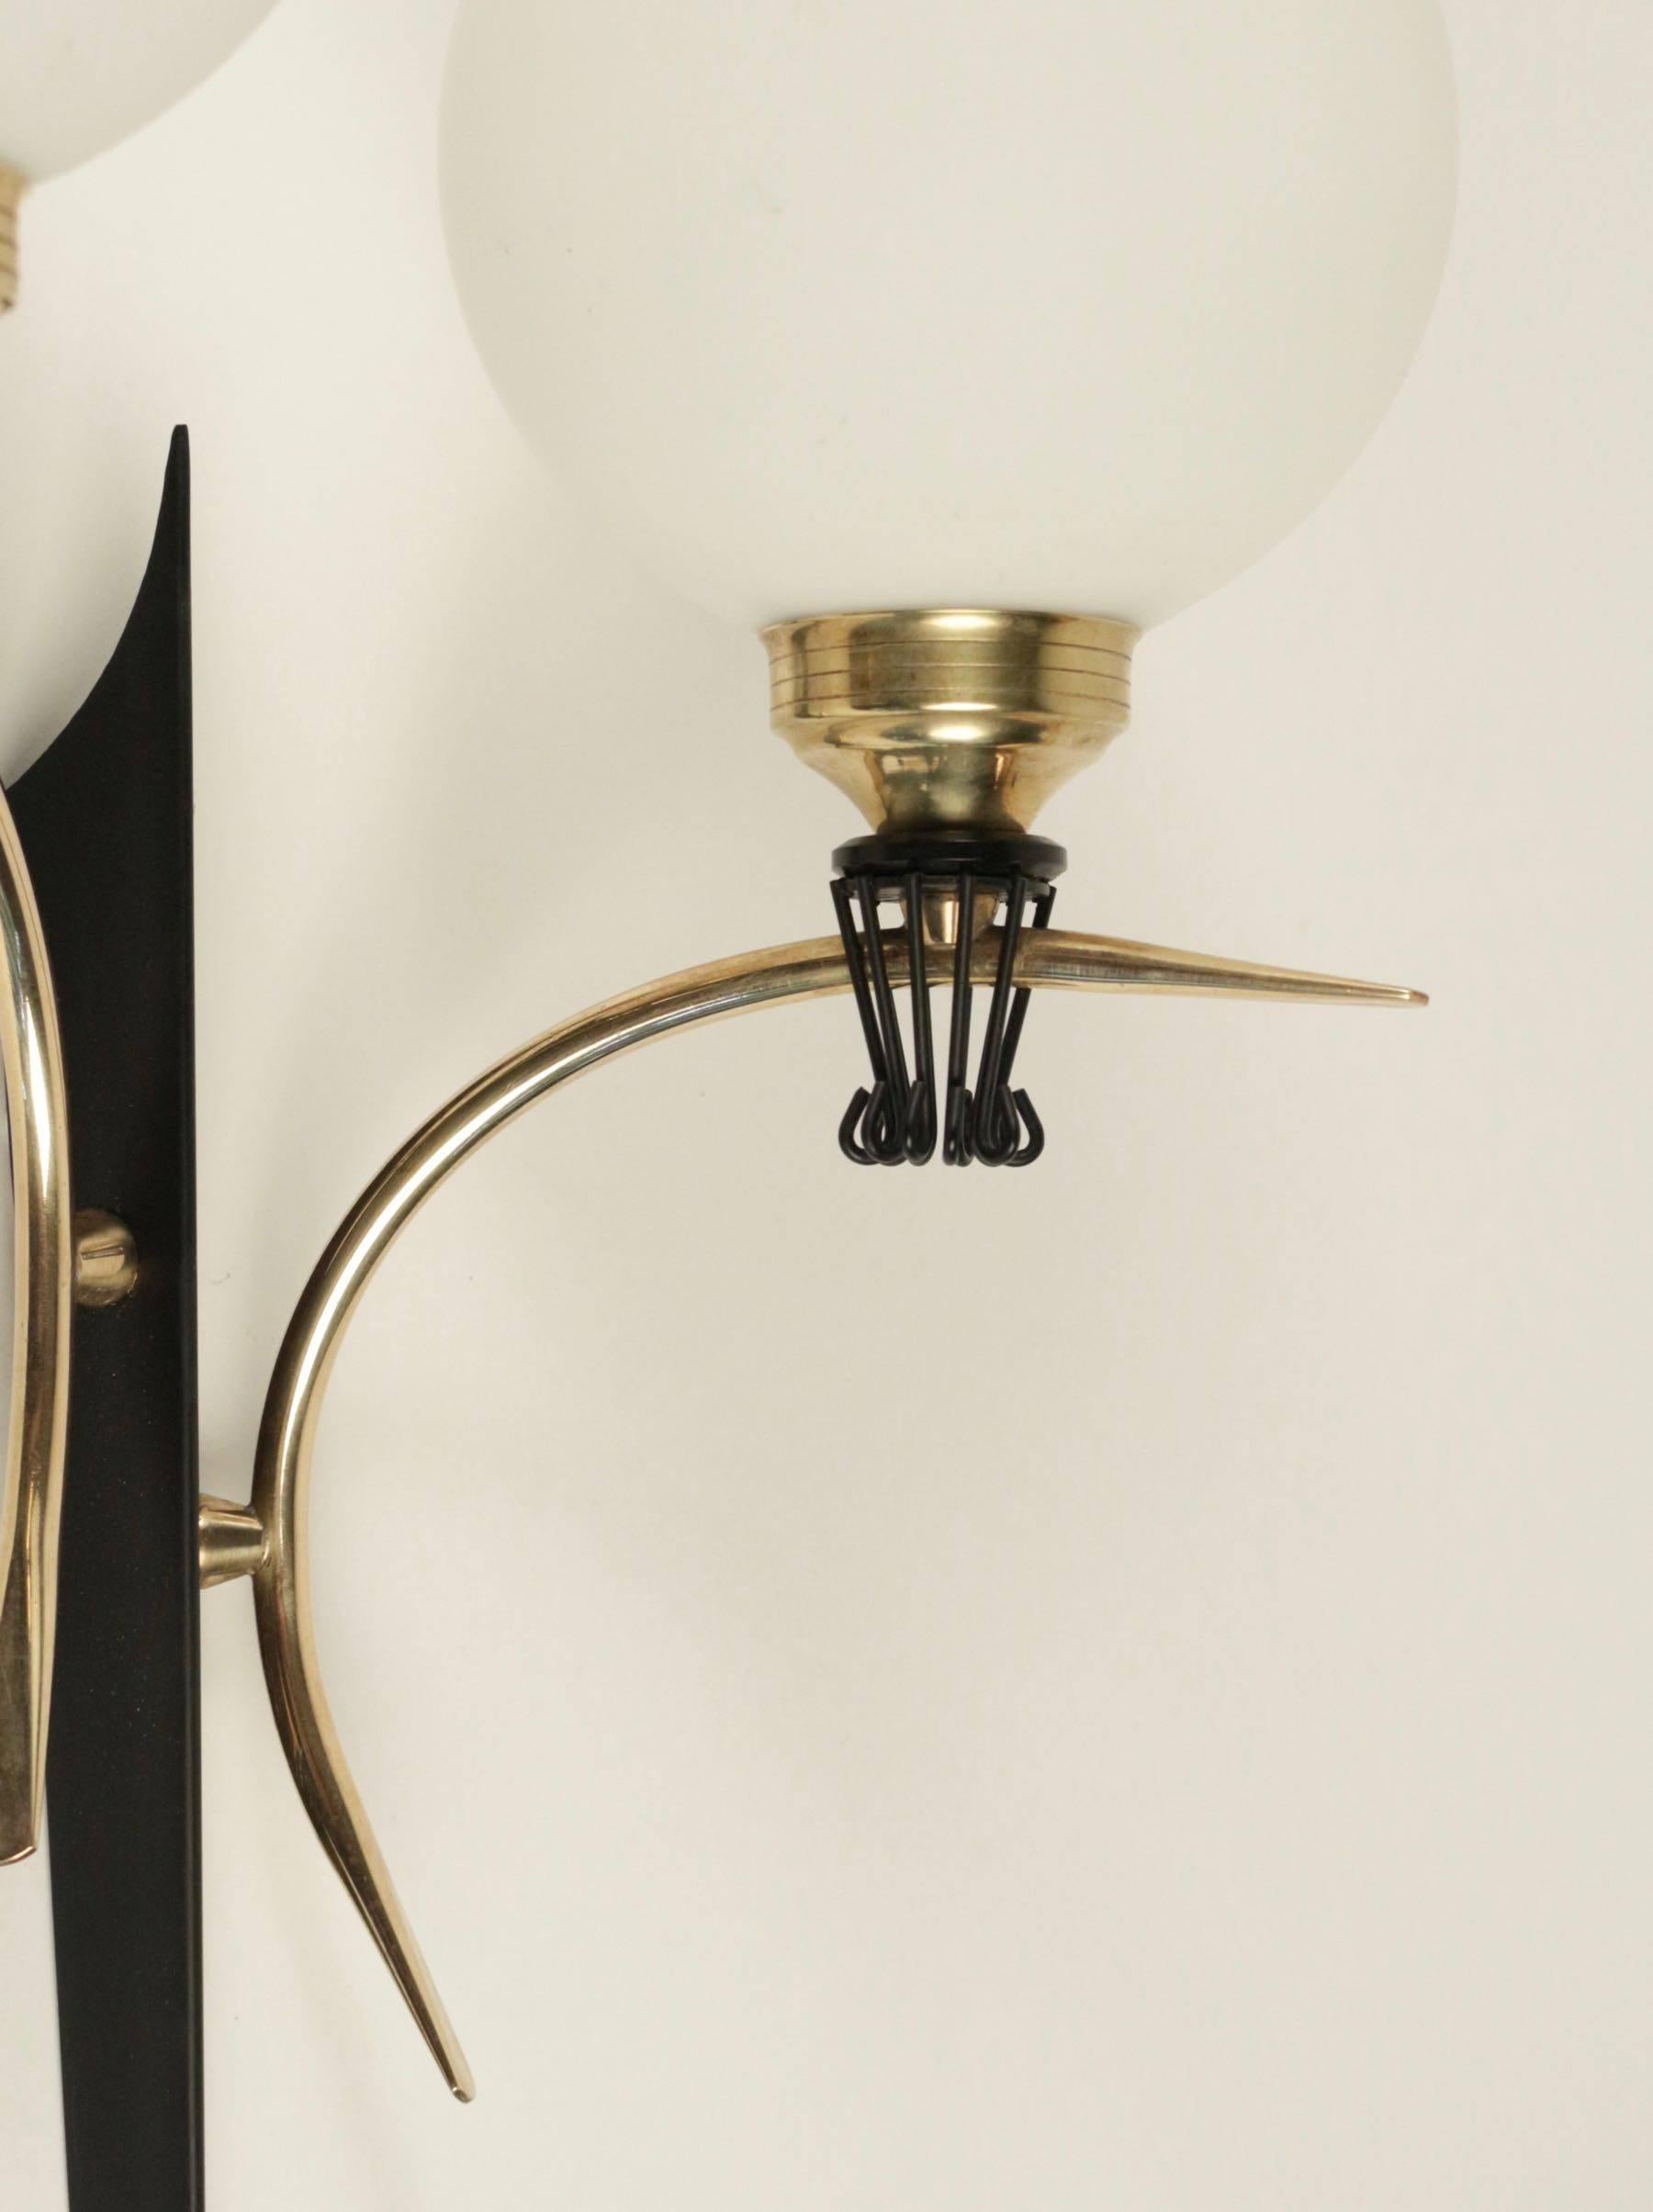 Large pair of sconce in the style of Maison Stilnovo, 1950.

The black lacquered back plate supports two curved brass arms. Two round opaline glass lampshades are highlighted by black collar and brass bulbs sockets.

Two bulbs per sconce.